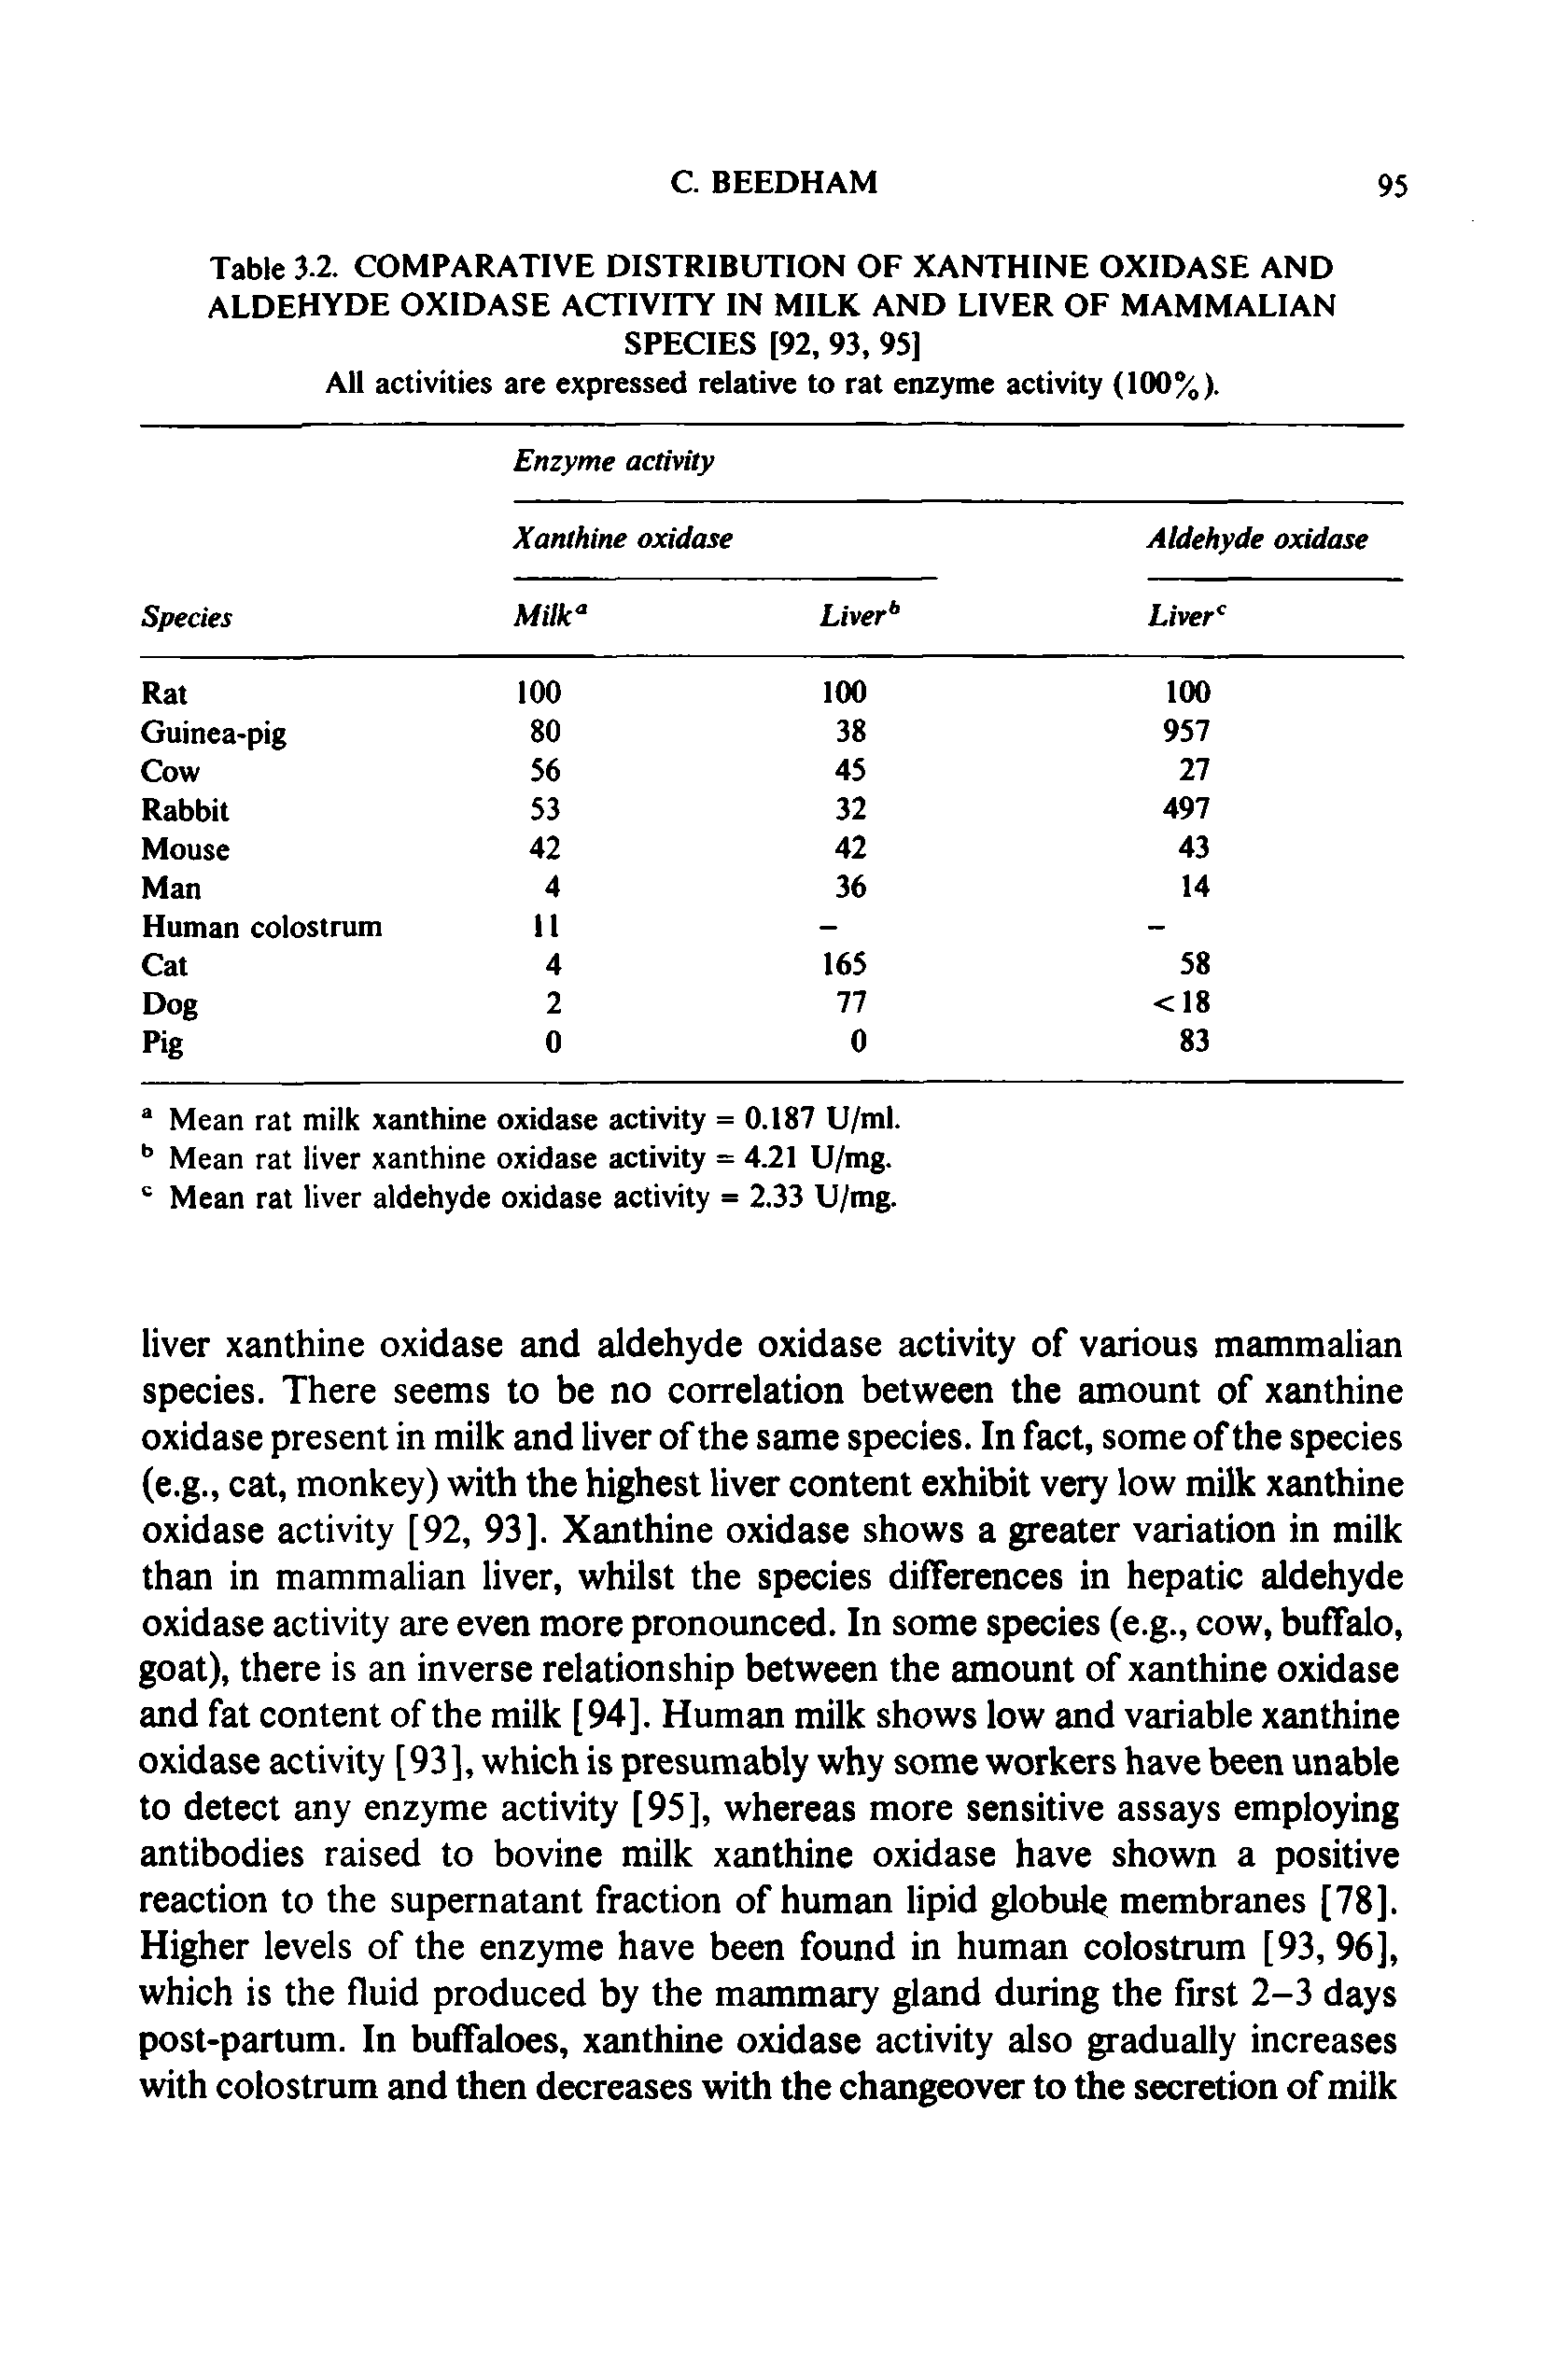 Table 3 2. COMPARATIVE DISTRIBUTION OF XANTHINE OXIDASE AND ALDEHYDE OXIDASE ACTIVITY IN MILK AND LIVER OF MAMMALIAN SPECIES [92, 93, 95]...